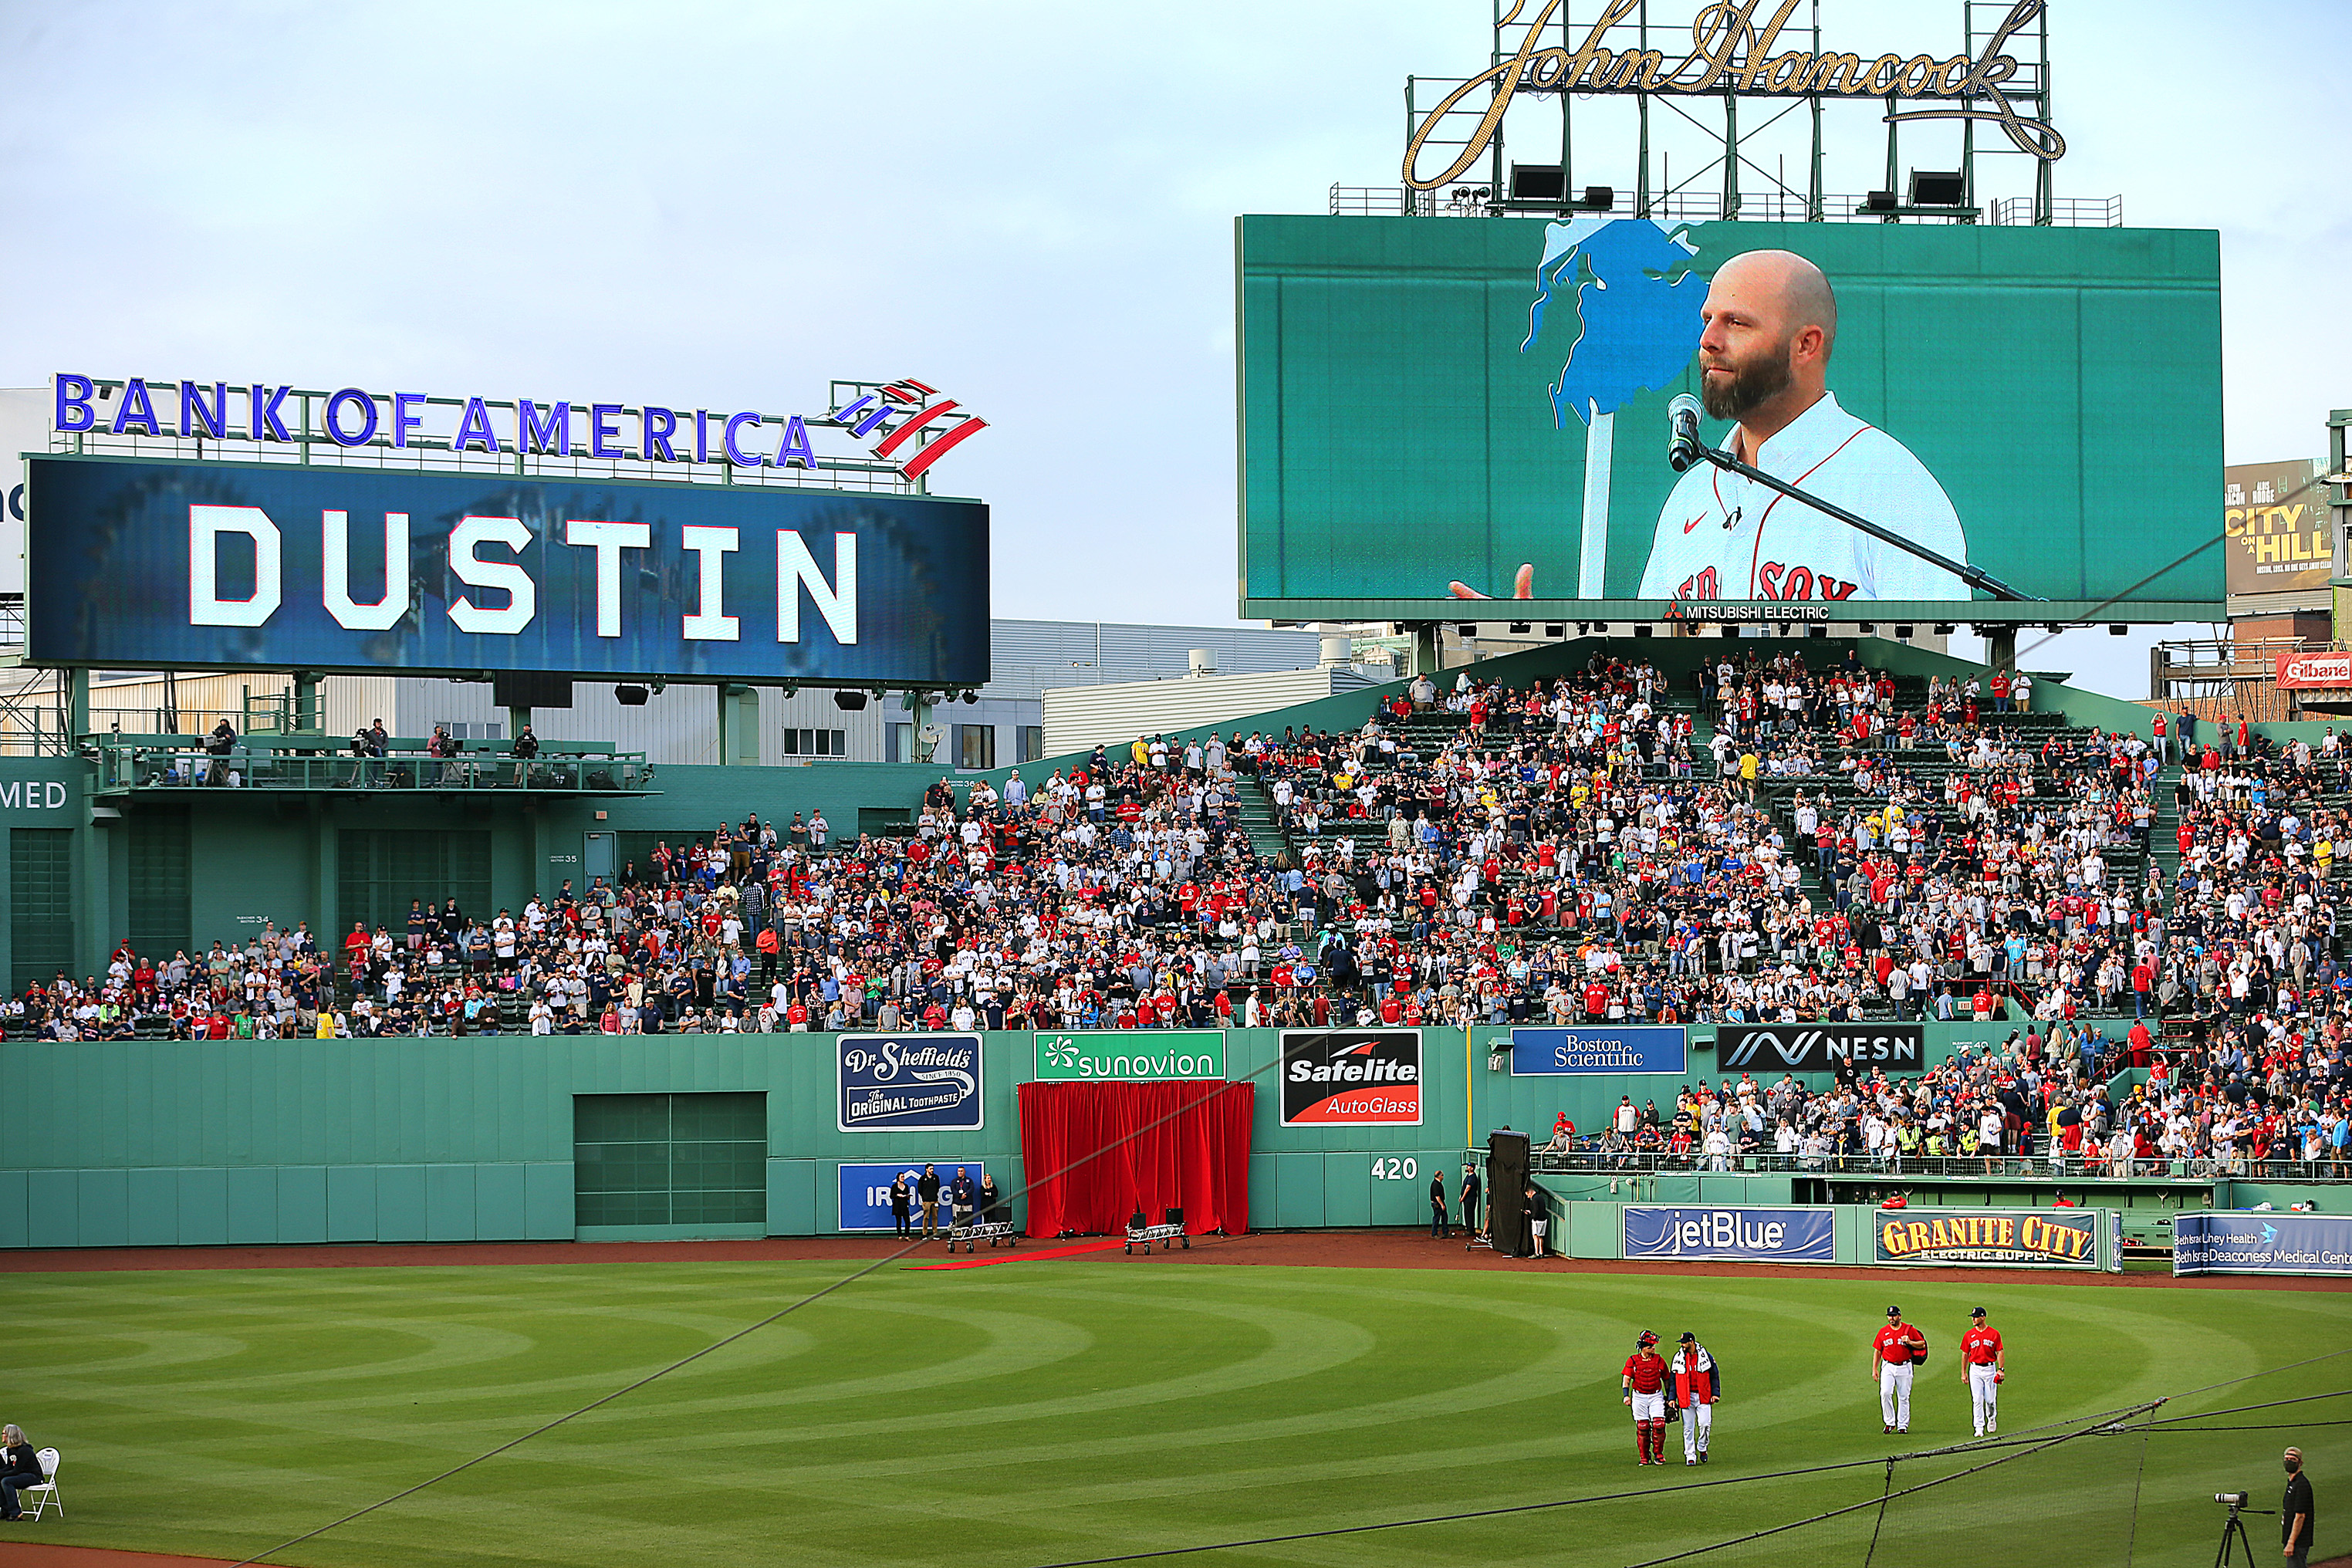 Dustin Pedroia ceremony: Boston Red Sox to honor retired second baseman  June 25 at Fenway Park before game vs. Yankees 